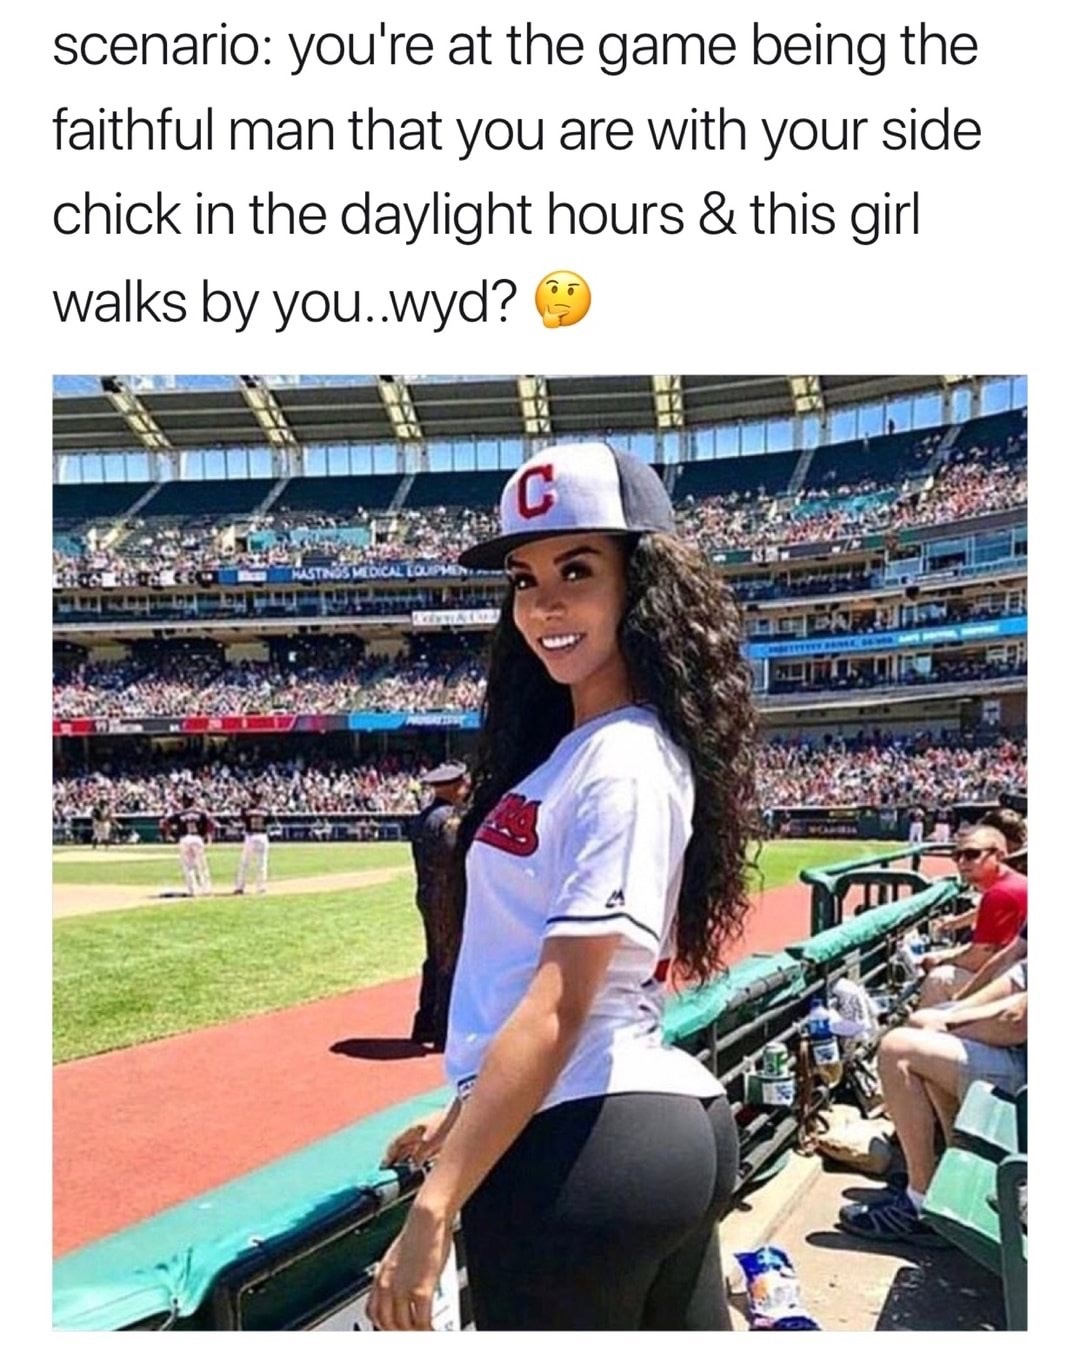 damn booty - scenario you're at the game being the faithful man that you are with your side chick in the daylight hours & this girl walks by you..wyd? Dos Ti